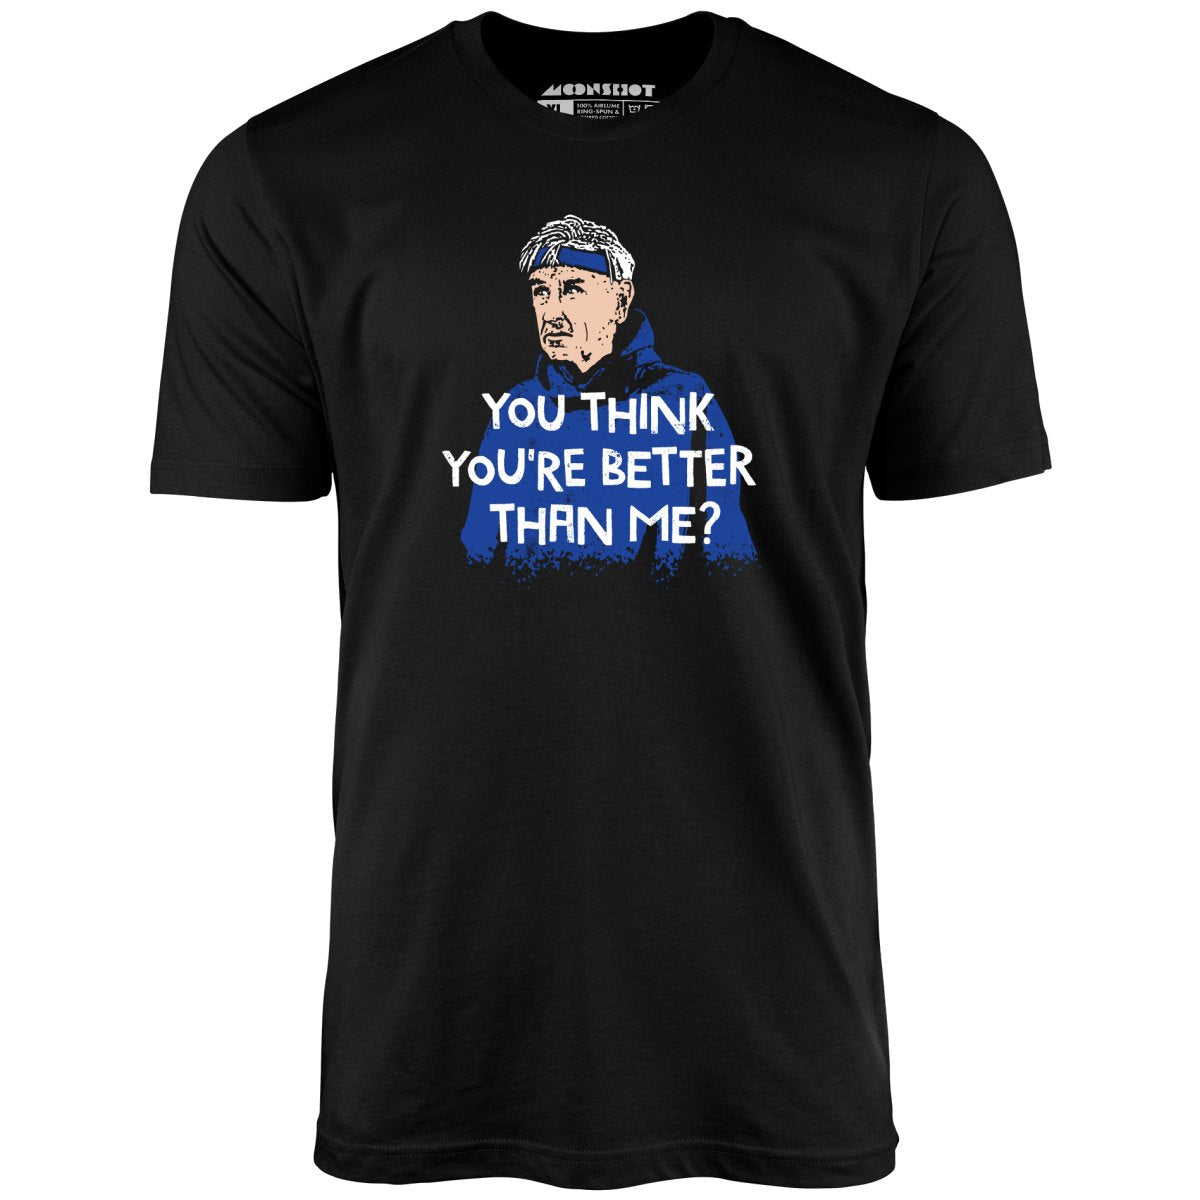 Izzy Mandelbaum - You Think You're Better Than Me? - Unisex T-Shirt